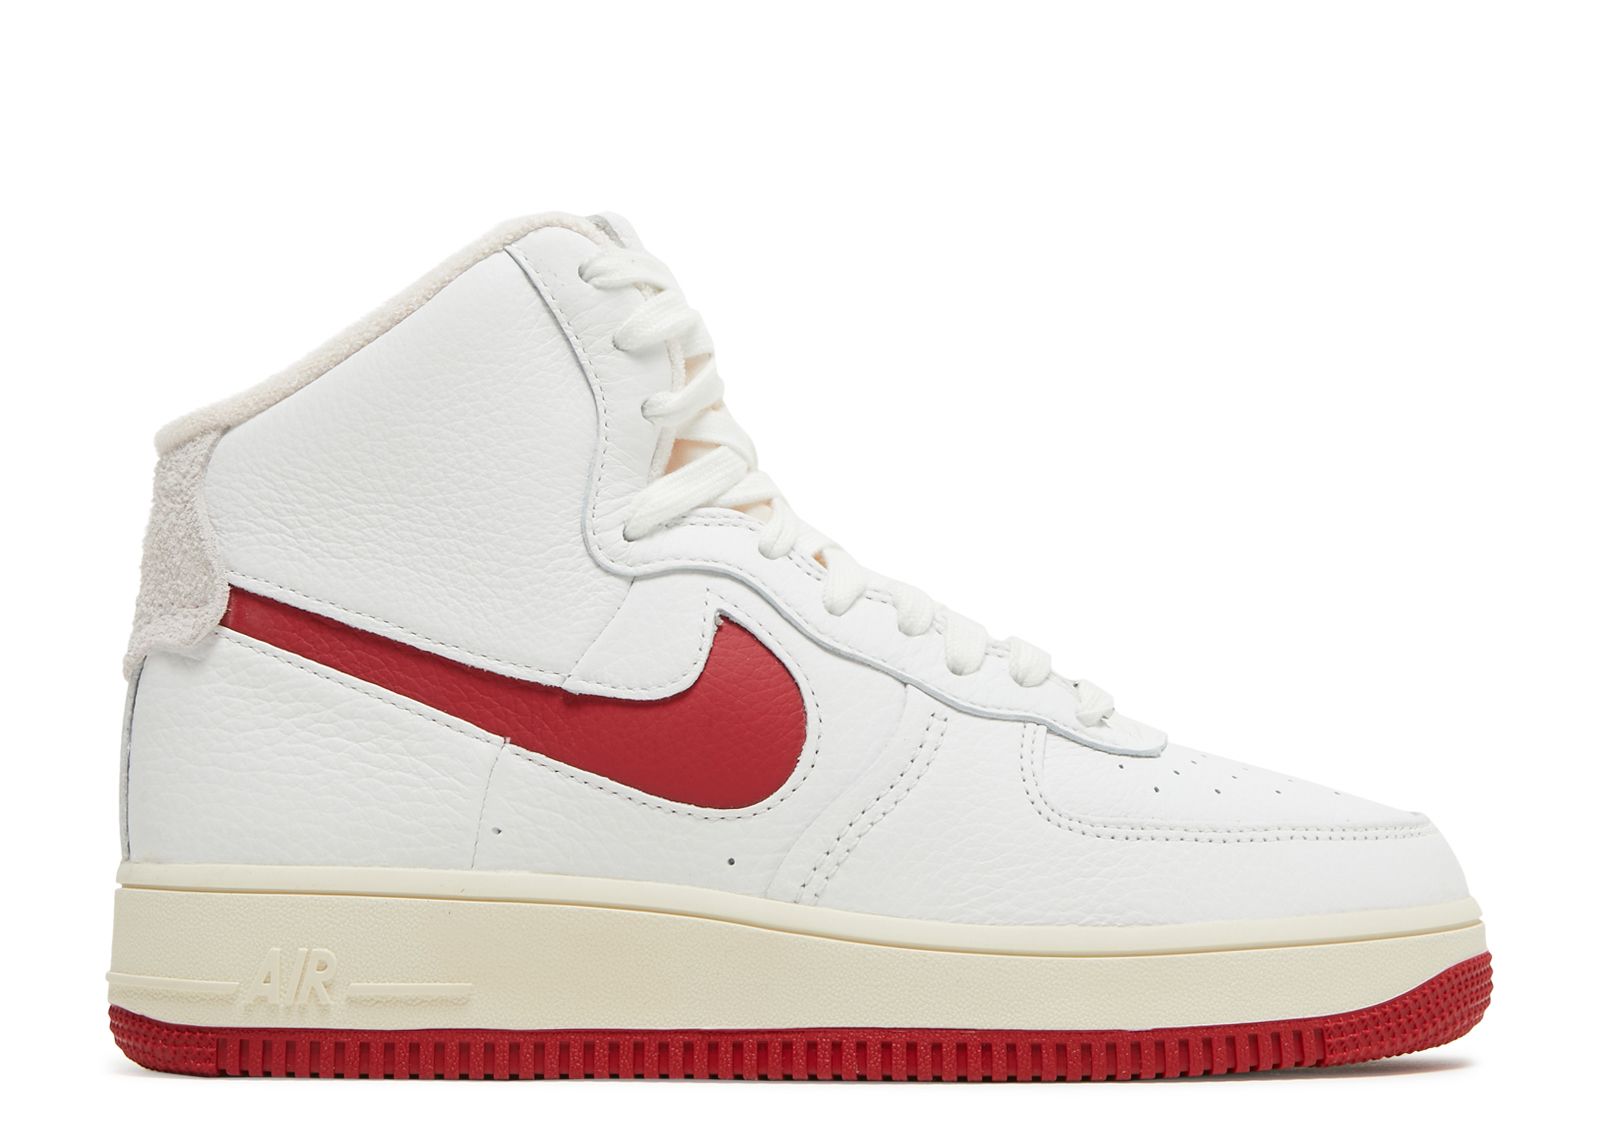 Кроссовки Nike Wmns Air Force 1 High Sculpt 'White Gym Red', белый new nike air force 1 script swoosh women white skateboarding shoes original light weight outdoor sports sneakers